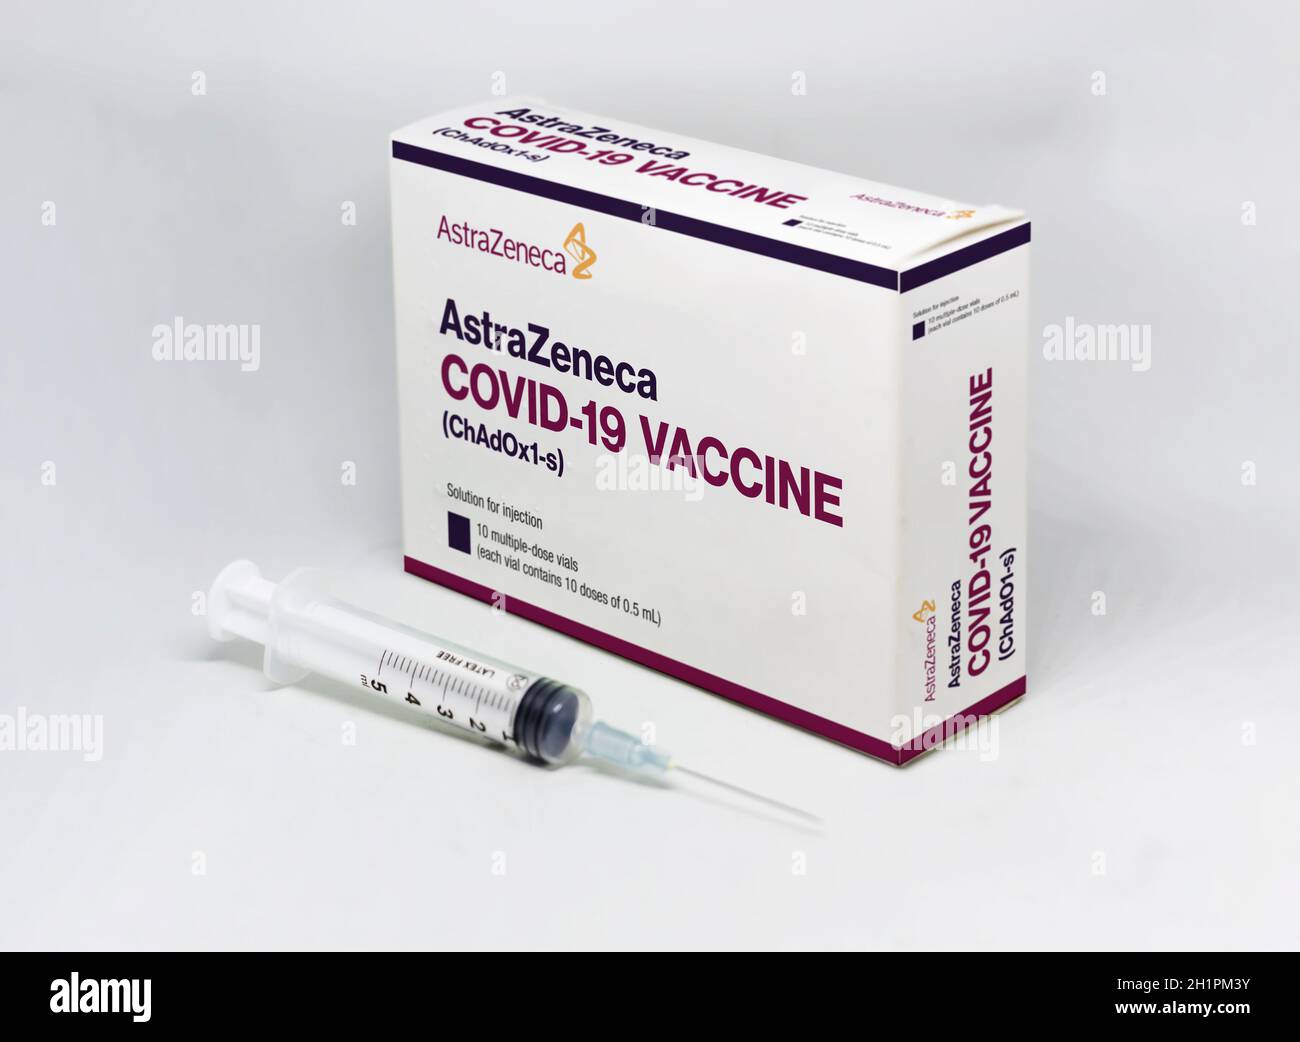 Cambridge, UK, february 5th 2021: A syringe next to the AstraZeneca Covid-19 vaccine box isolated on a white background. Health and prevention. Stock Photo